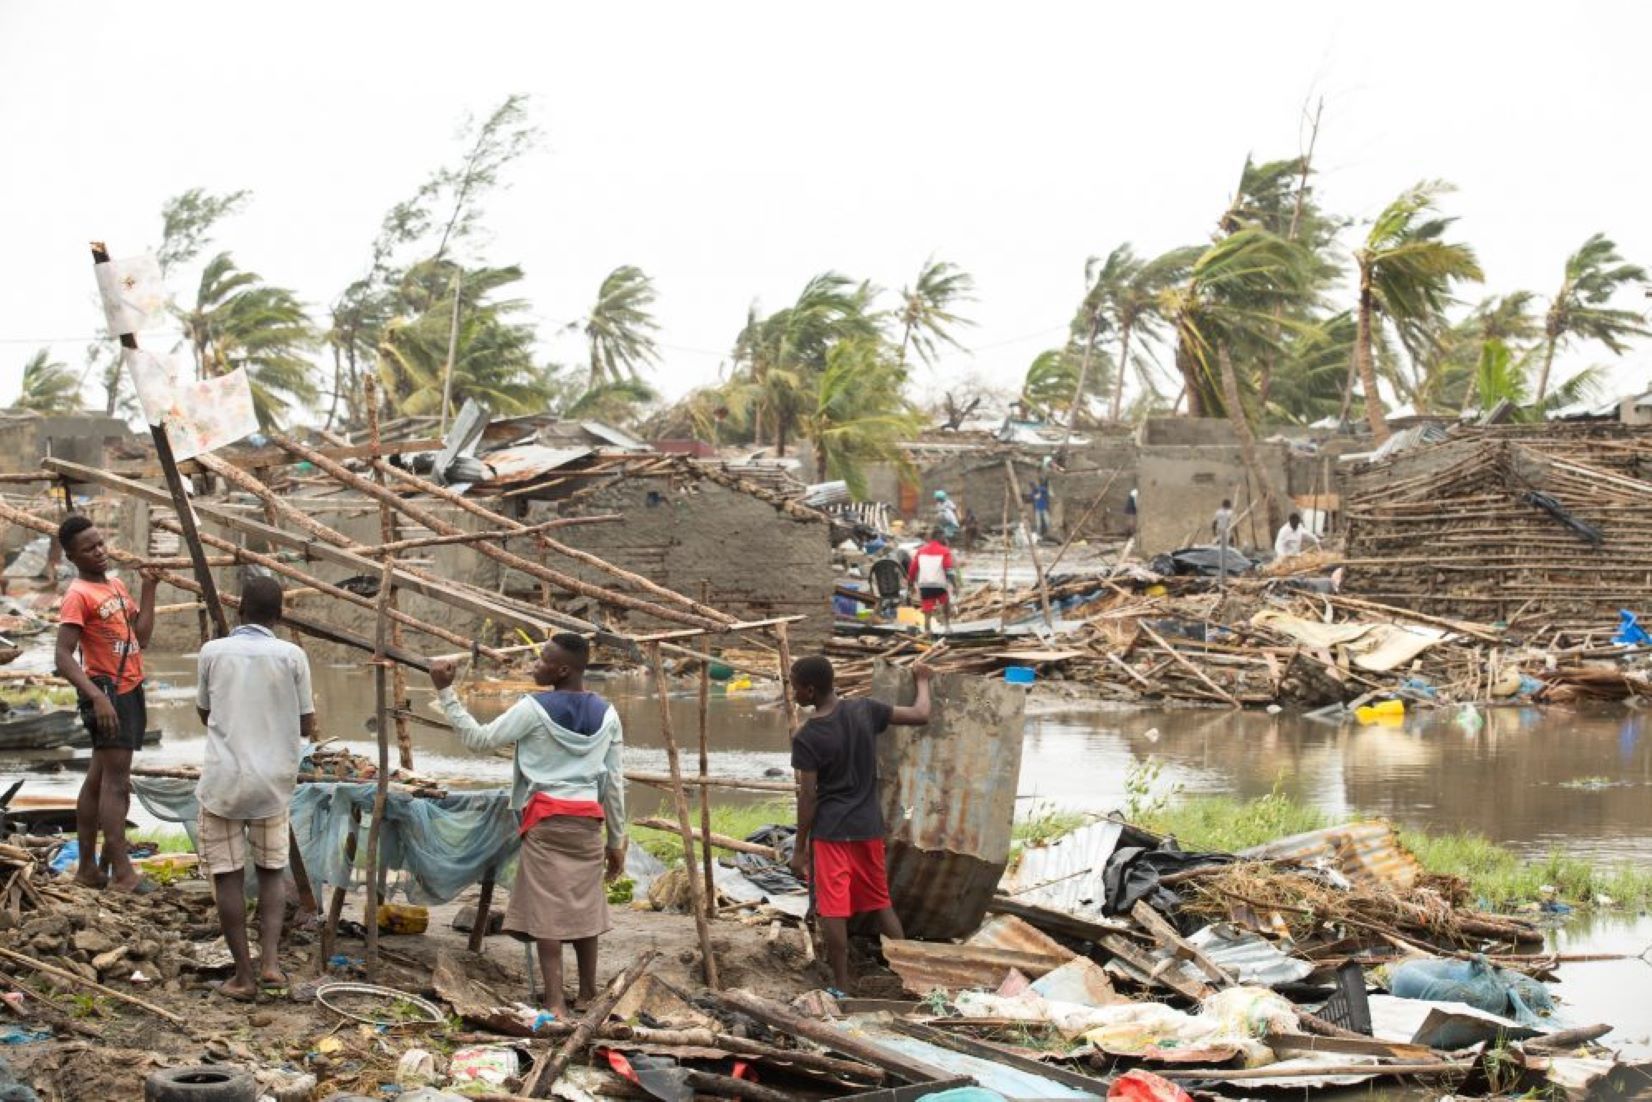 Natural Disasters Cost Mozambique 1.3 Percent Of Its GDP Over Past 20 Years: Report